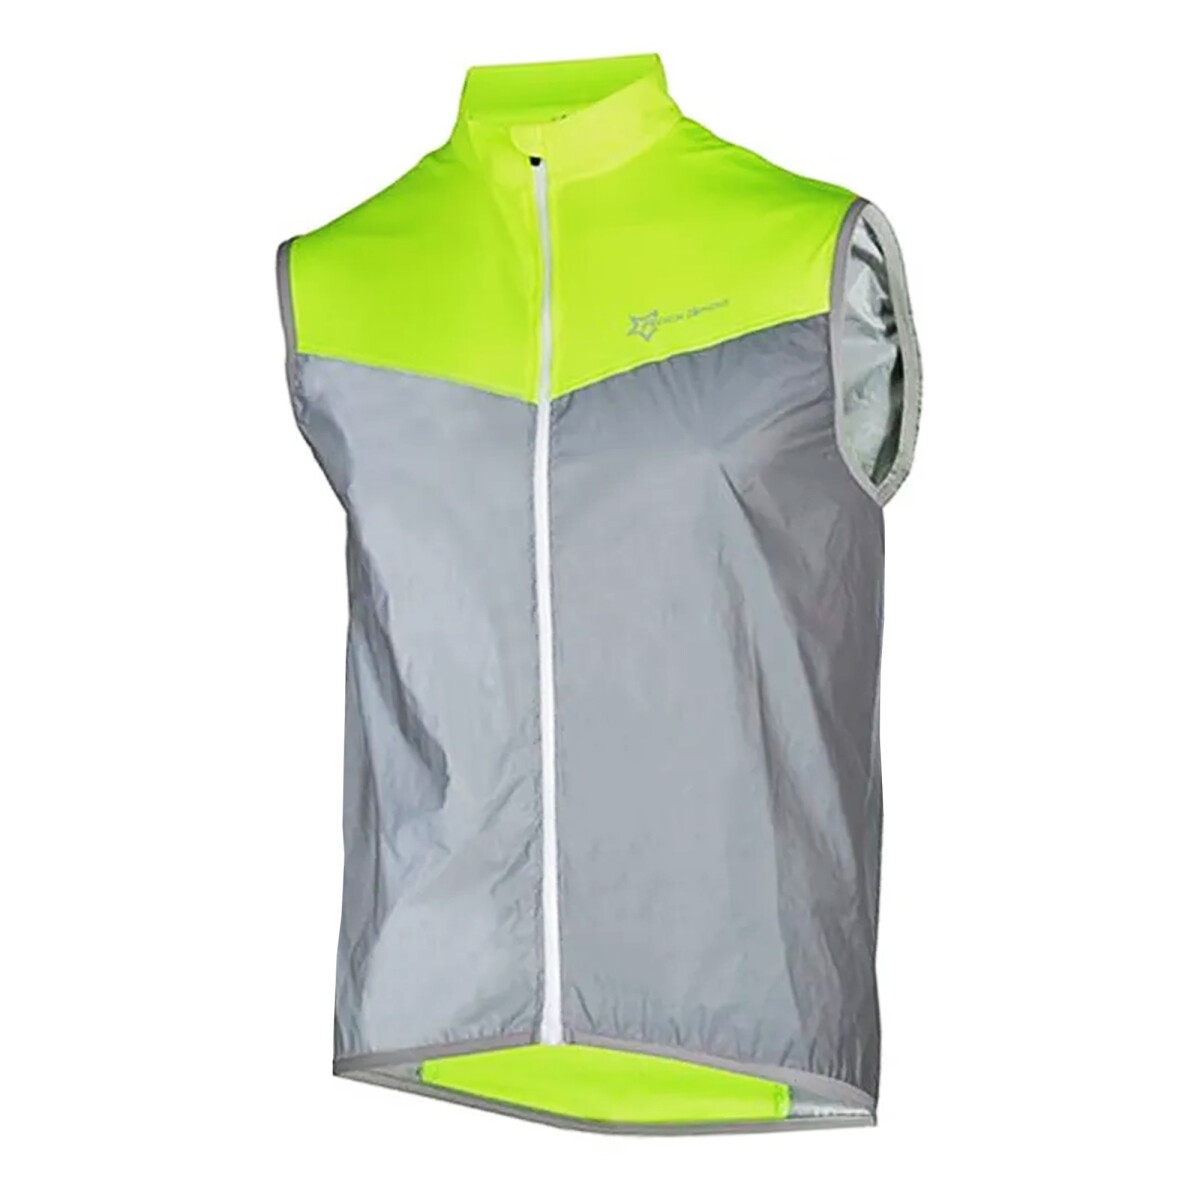 Rockbros - Chaleco Ciclista Unisex FGY1001 - Reflectante. Impermeable. Rompeviento. Xl. - 001 